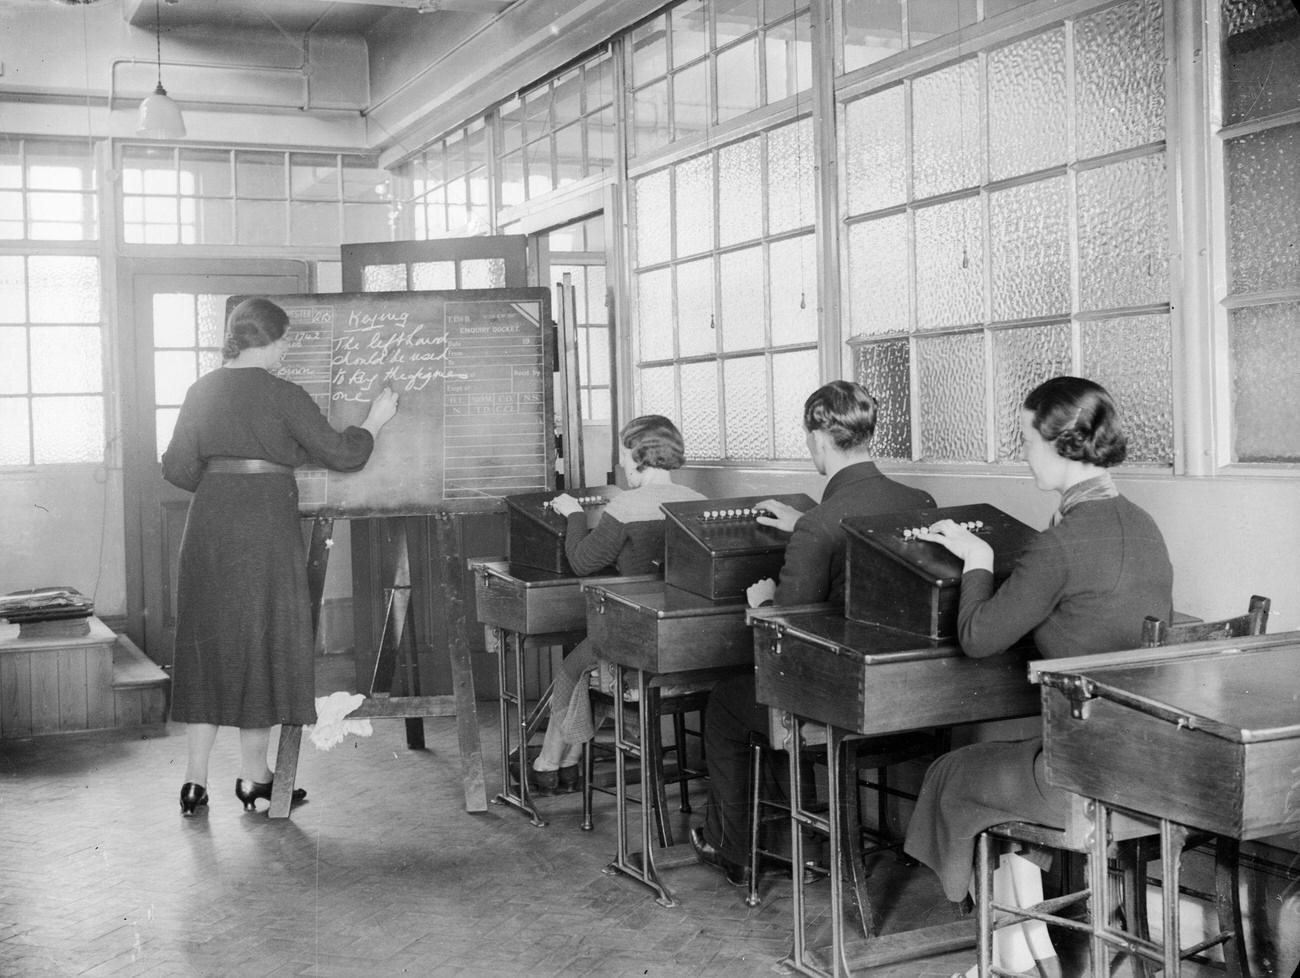 Class learning to key telephone calls to automatic exchanges, Telephone House, Salford, February 1937.